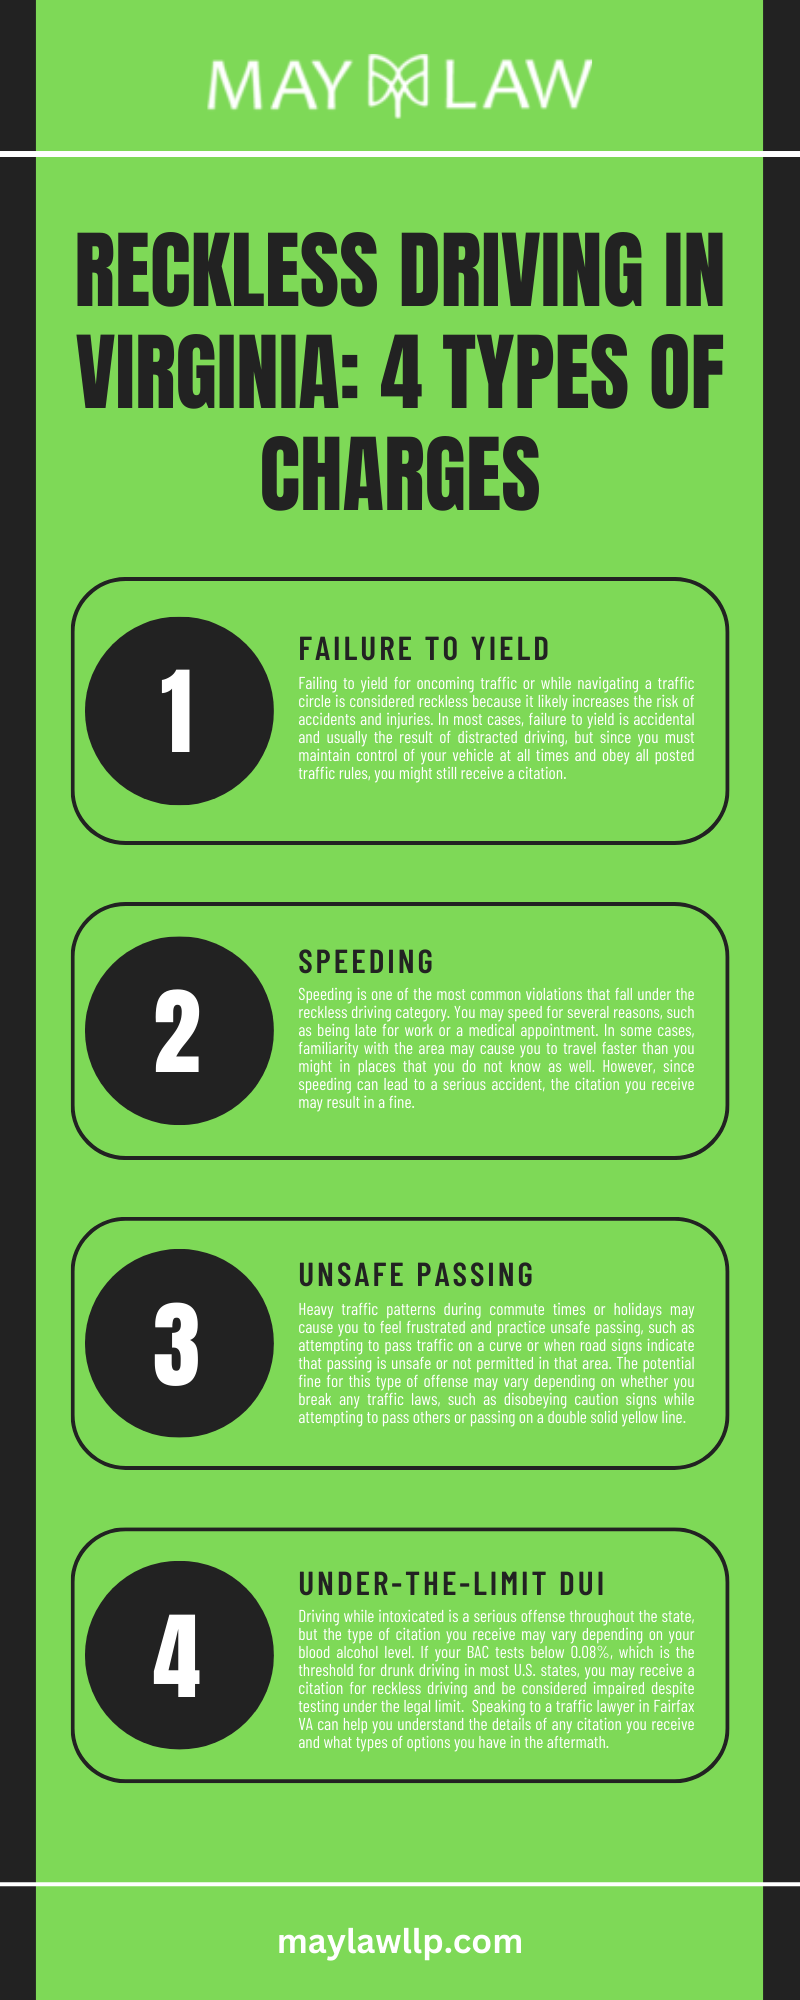 RECKLESS DRIVING IN VIRGINIA: 4 TYPES OF CHARGES INFOGRAPHIC